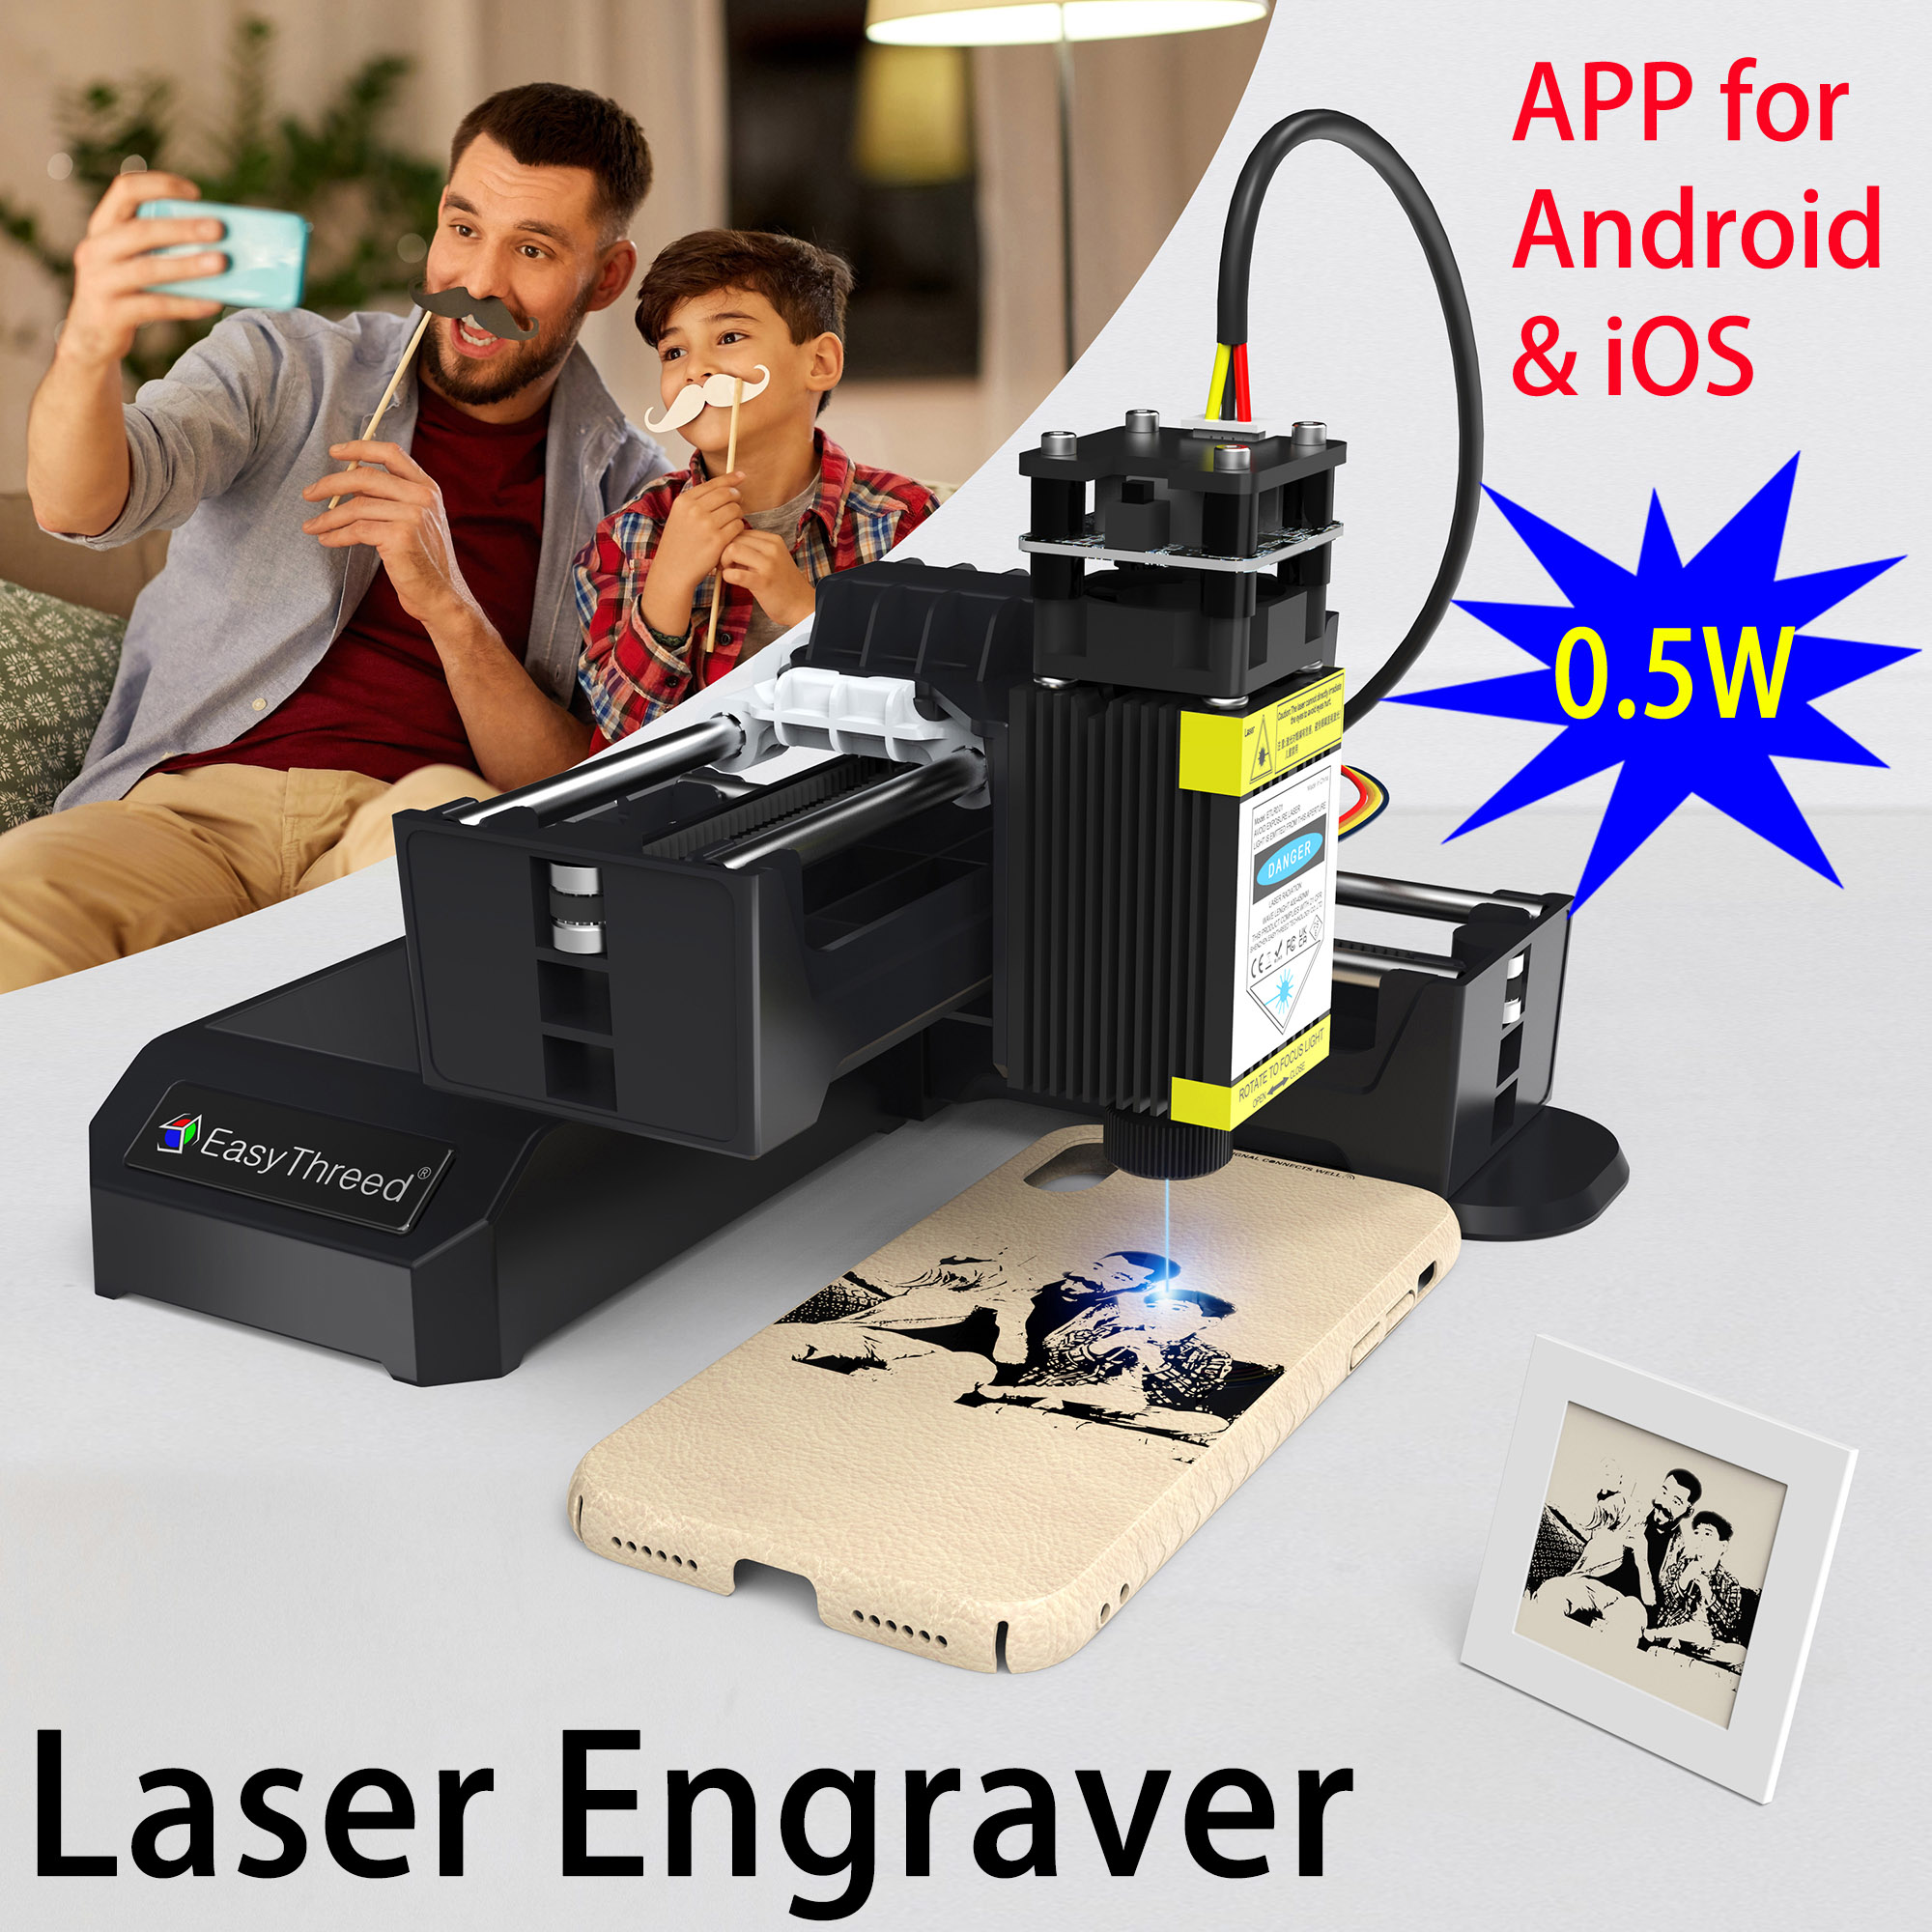 EasyThreed Laser Engraver 0.5W Entry Level Beginners Mobile APP Bluetooth connectivity Creative DIY Versatile Tool for Wood Leather Plastic Rubber Engraving Area 100x100mm 3.94x3.94inch